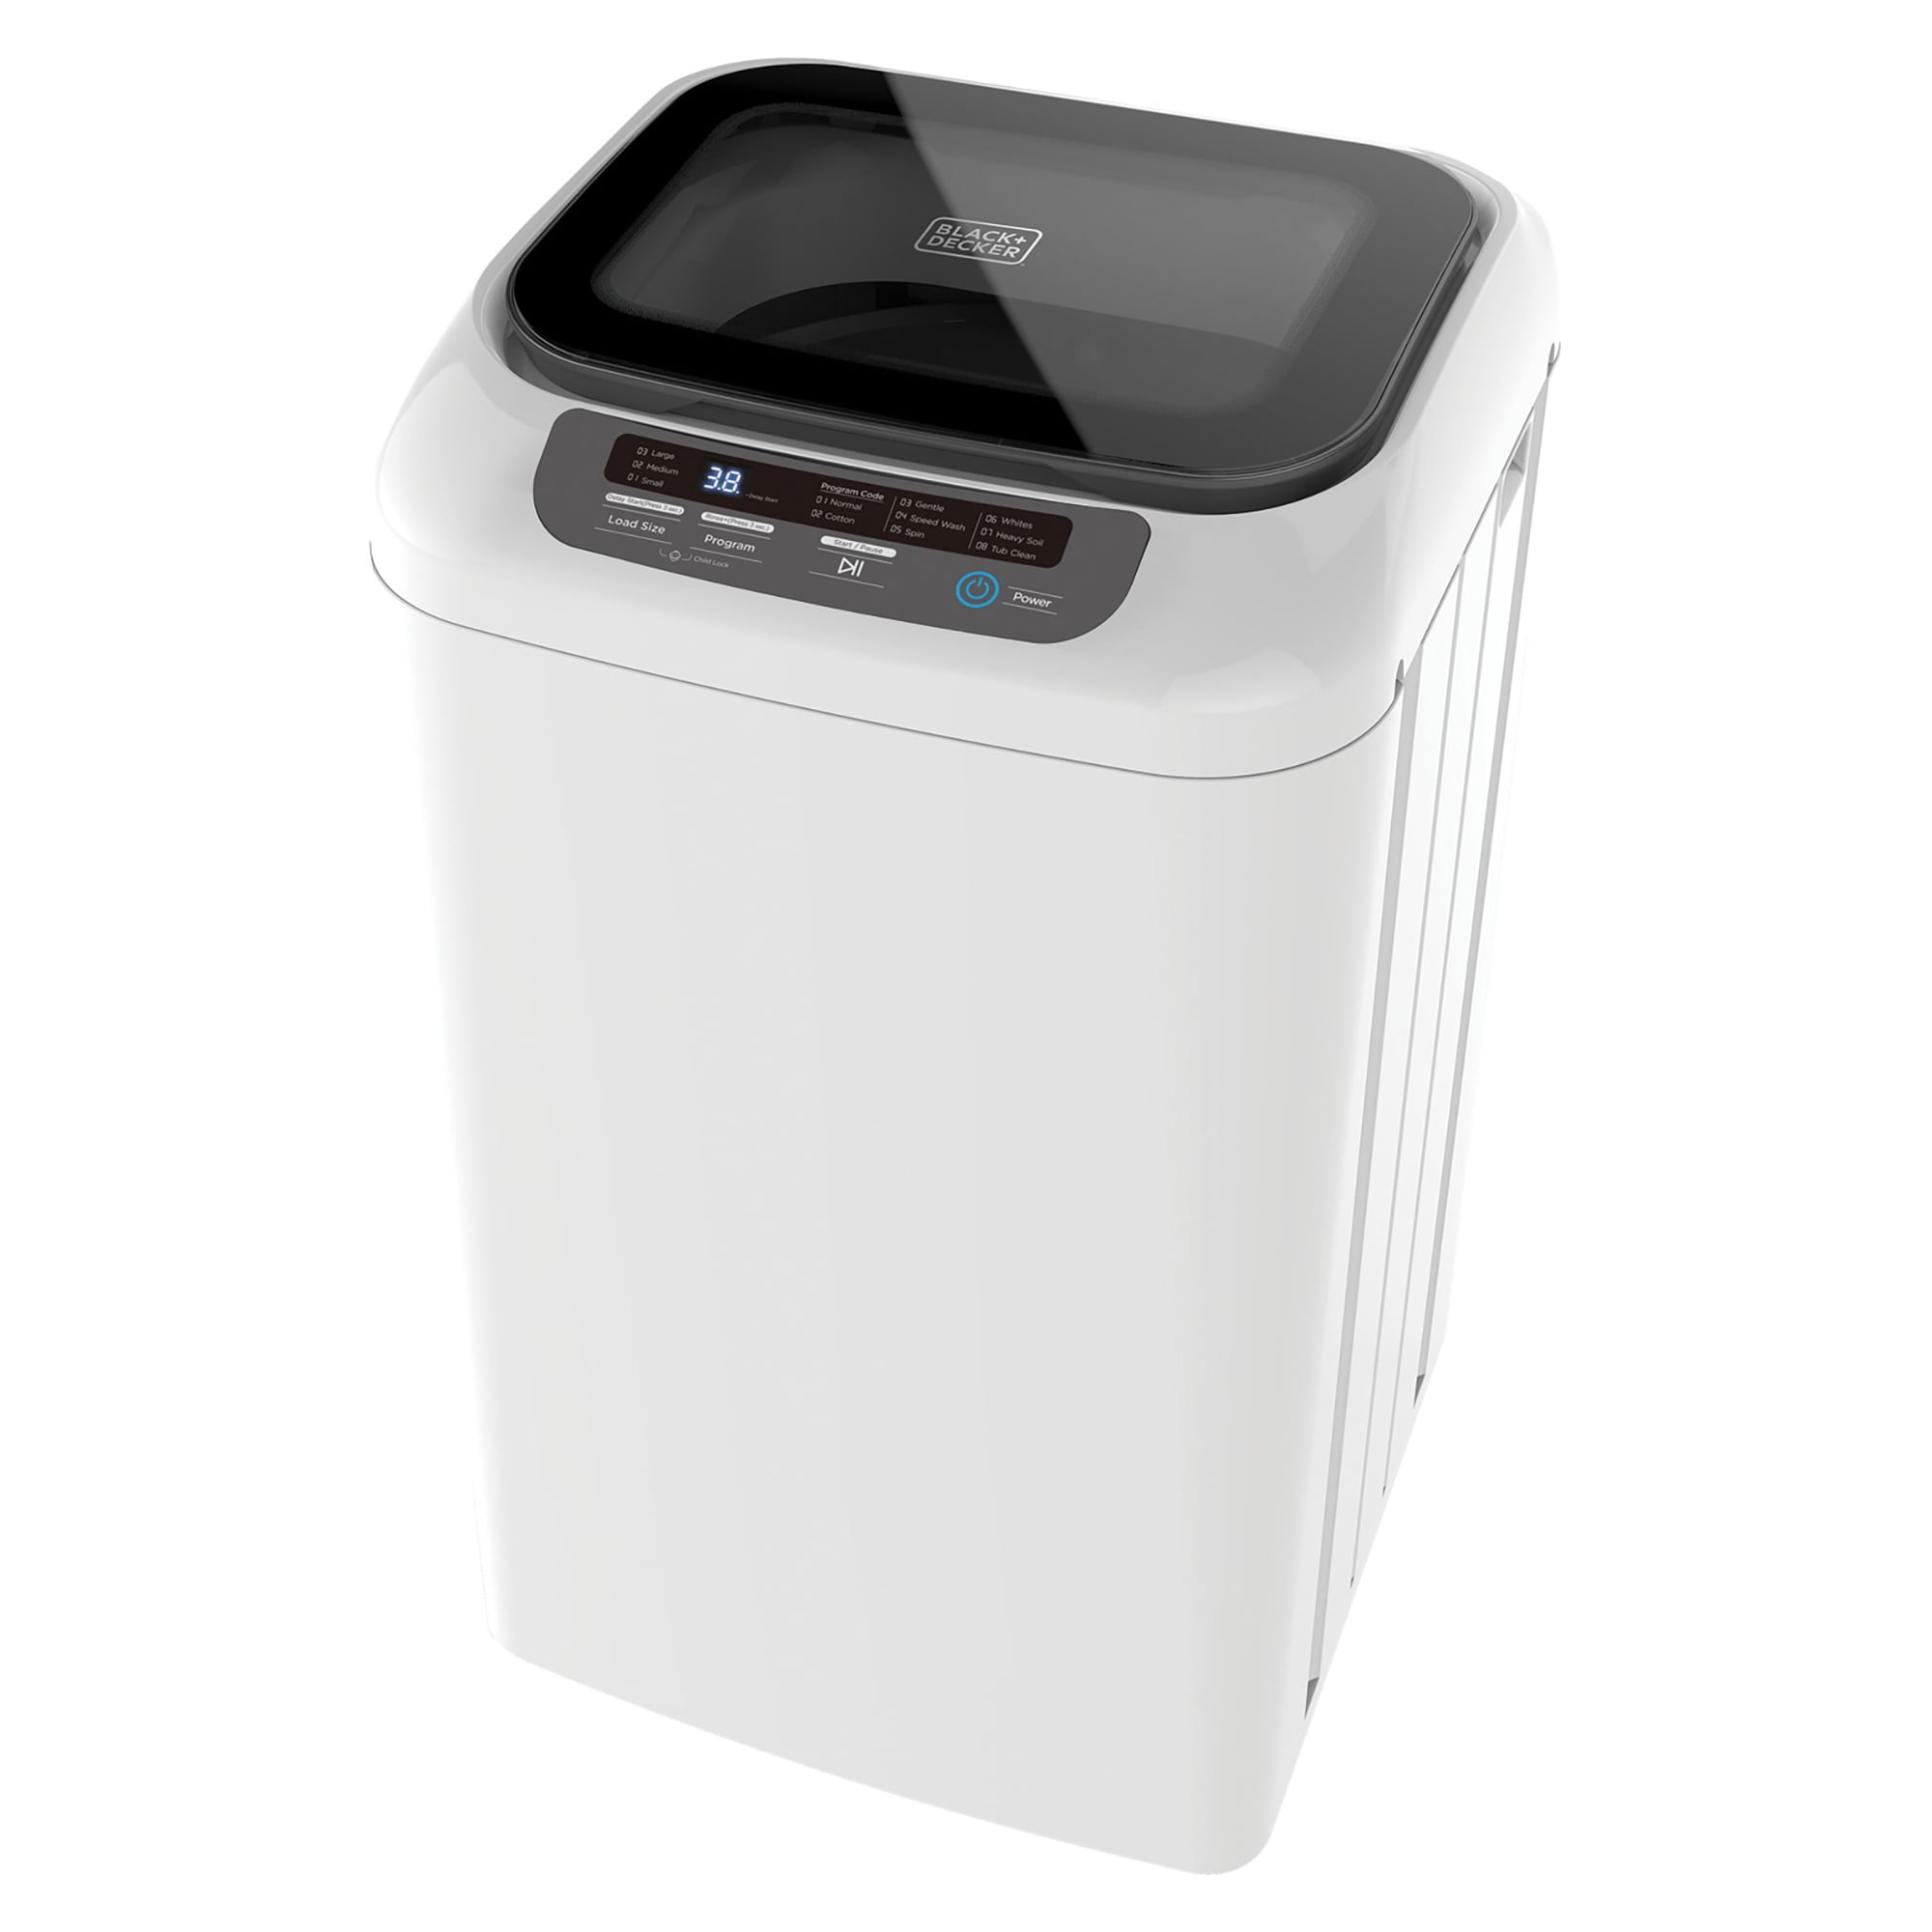 BLACK+DECKER Small Portable Washer 0.9 cu. ft., 5 Cycles, Transparent Lid &  LED Display 